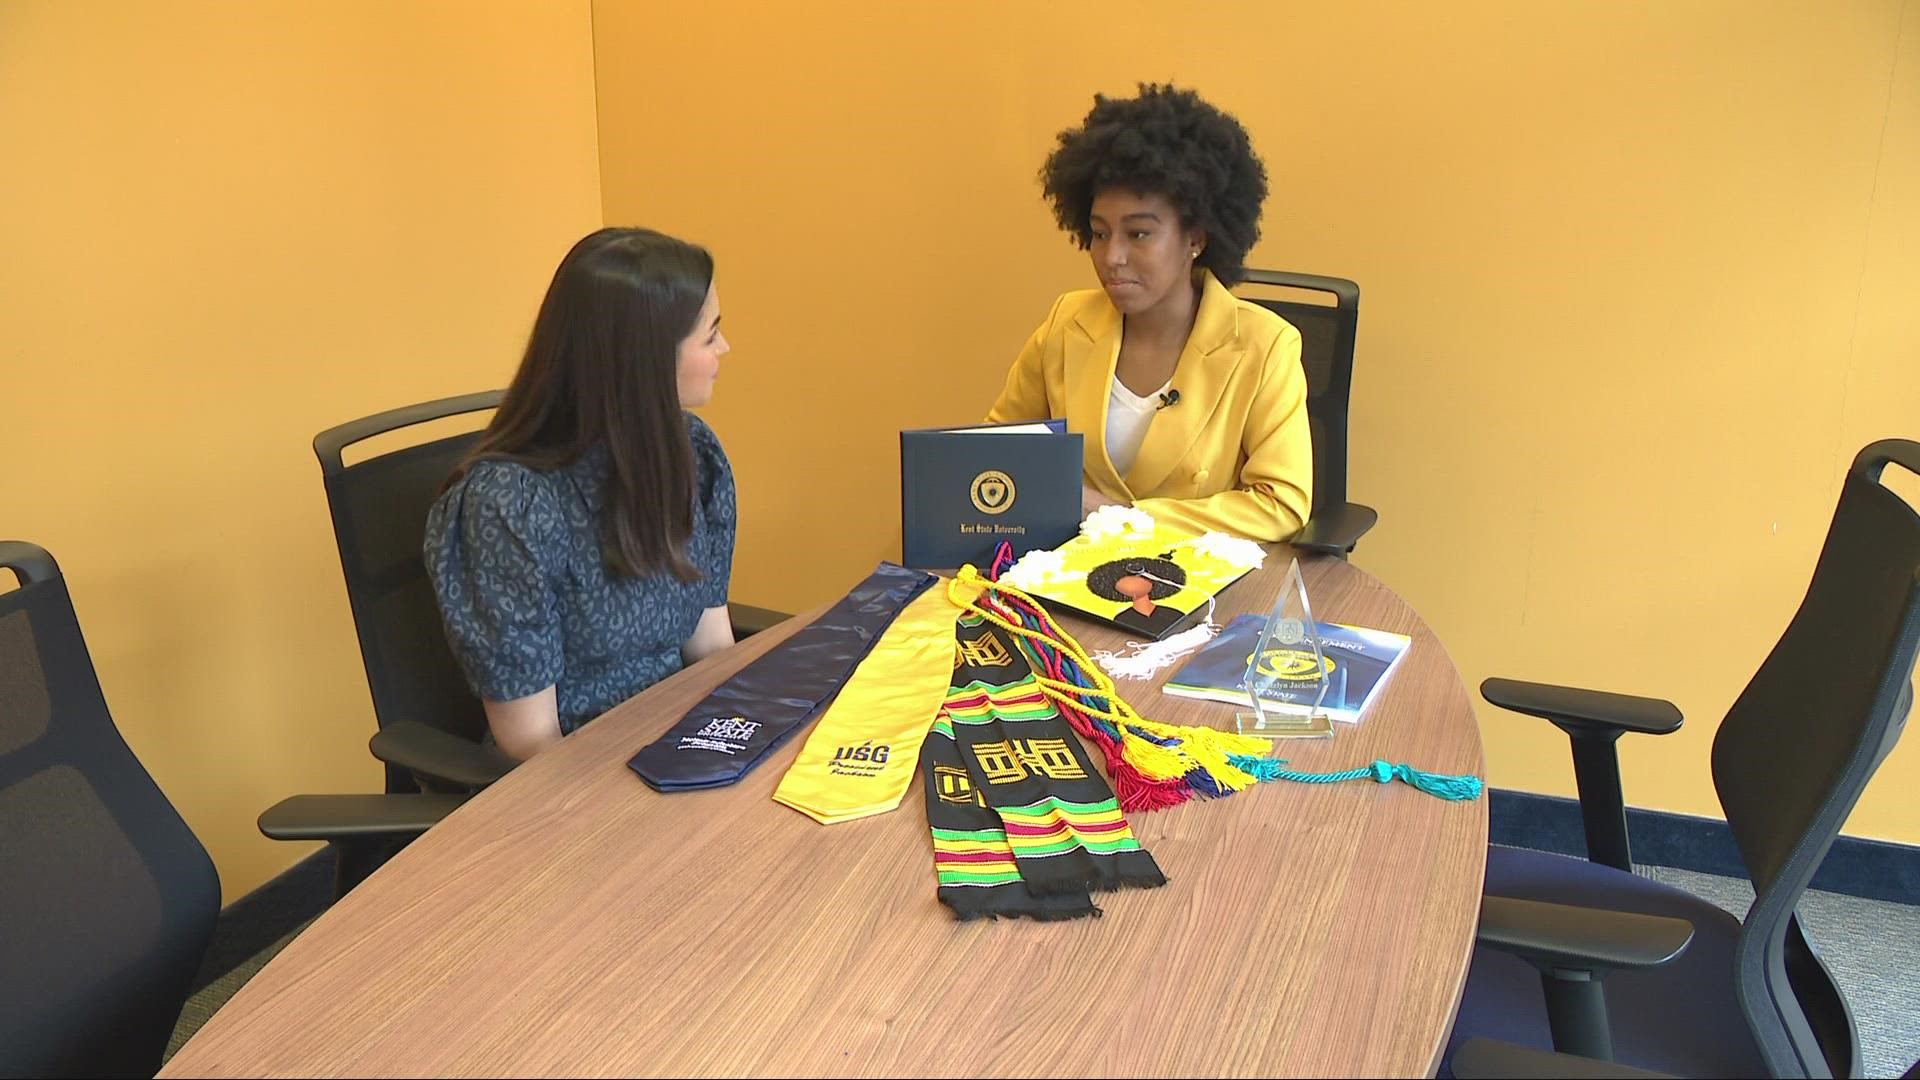 3News' Isabel Lawrence sat down with three recent college graduates in Northeast Ohio who overcame the odds.